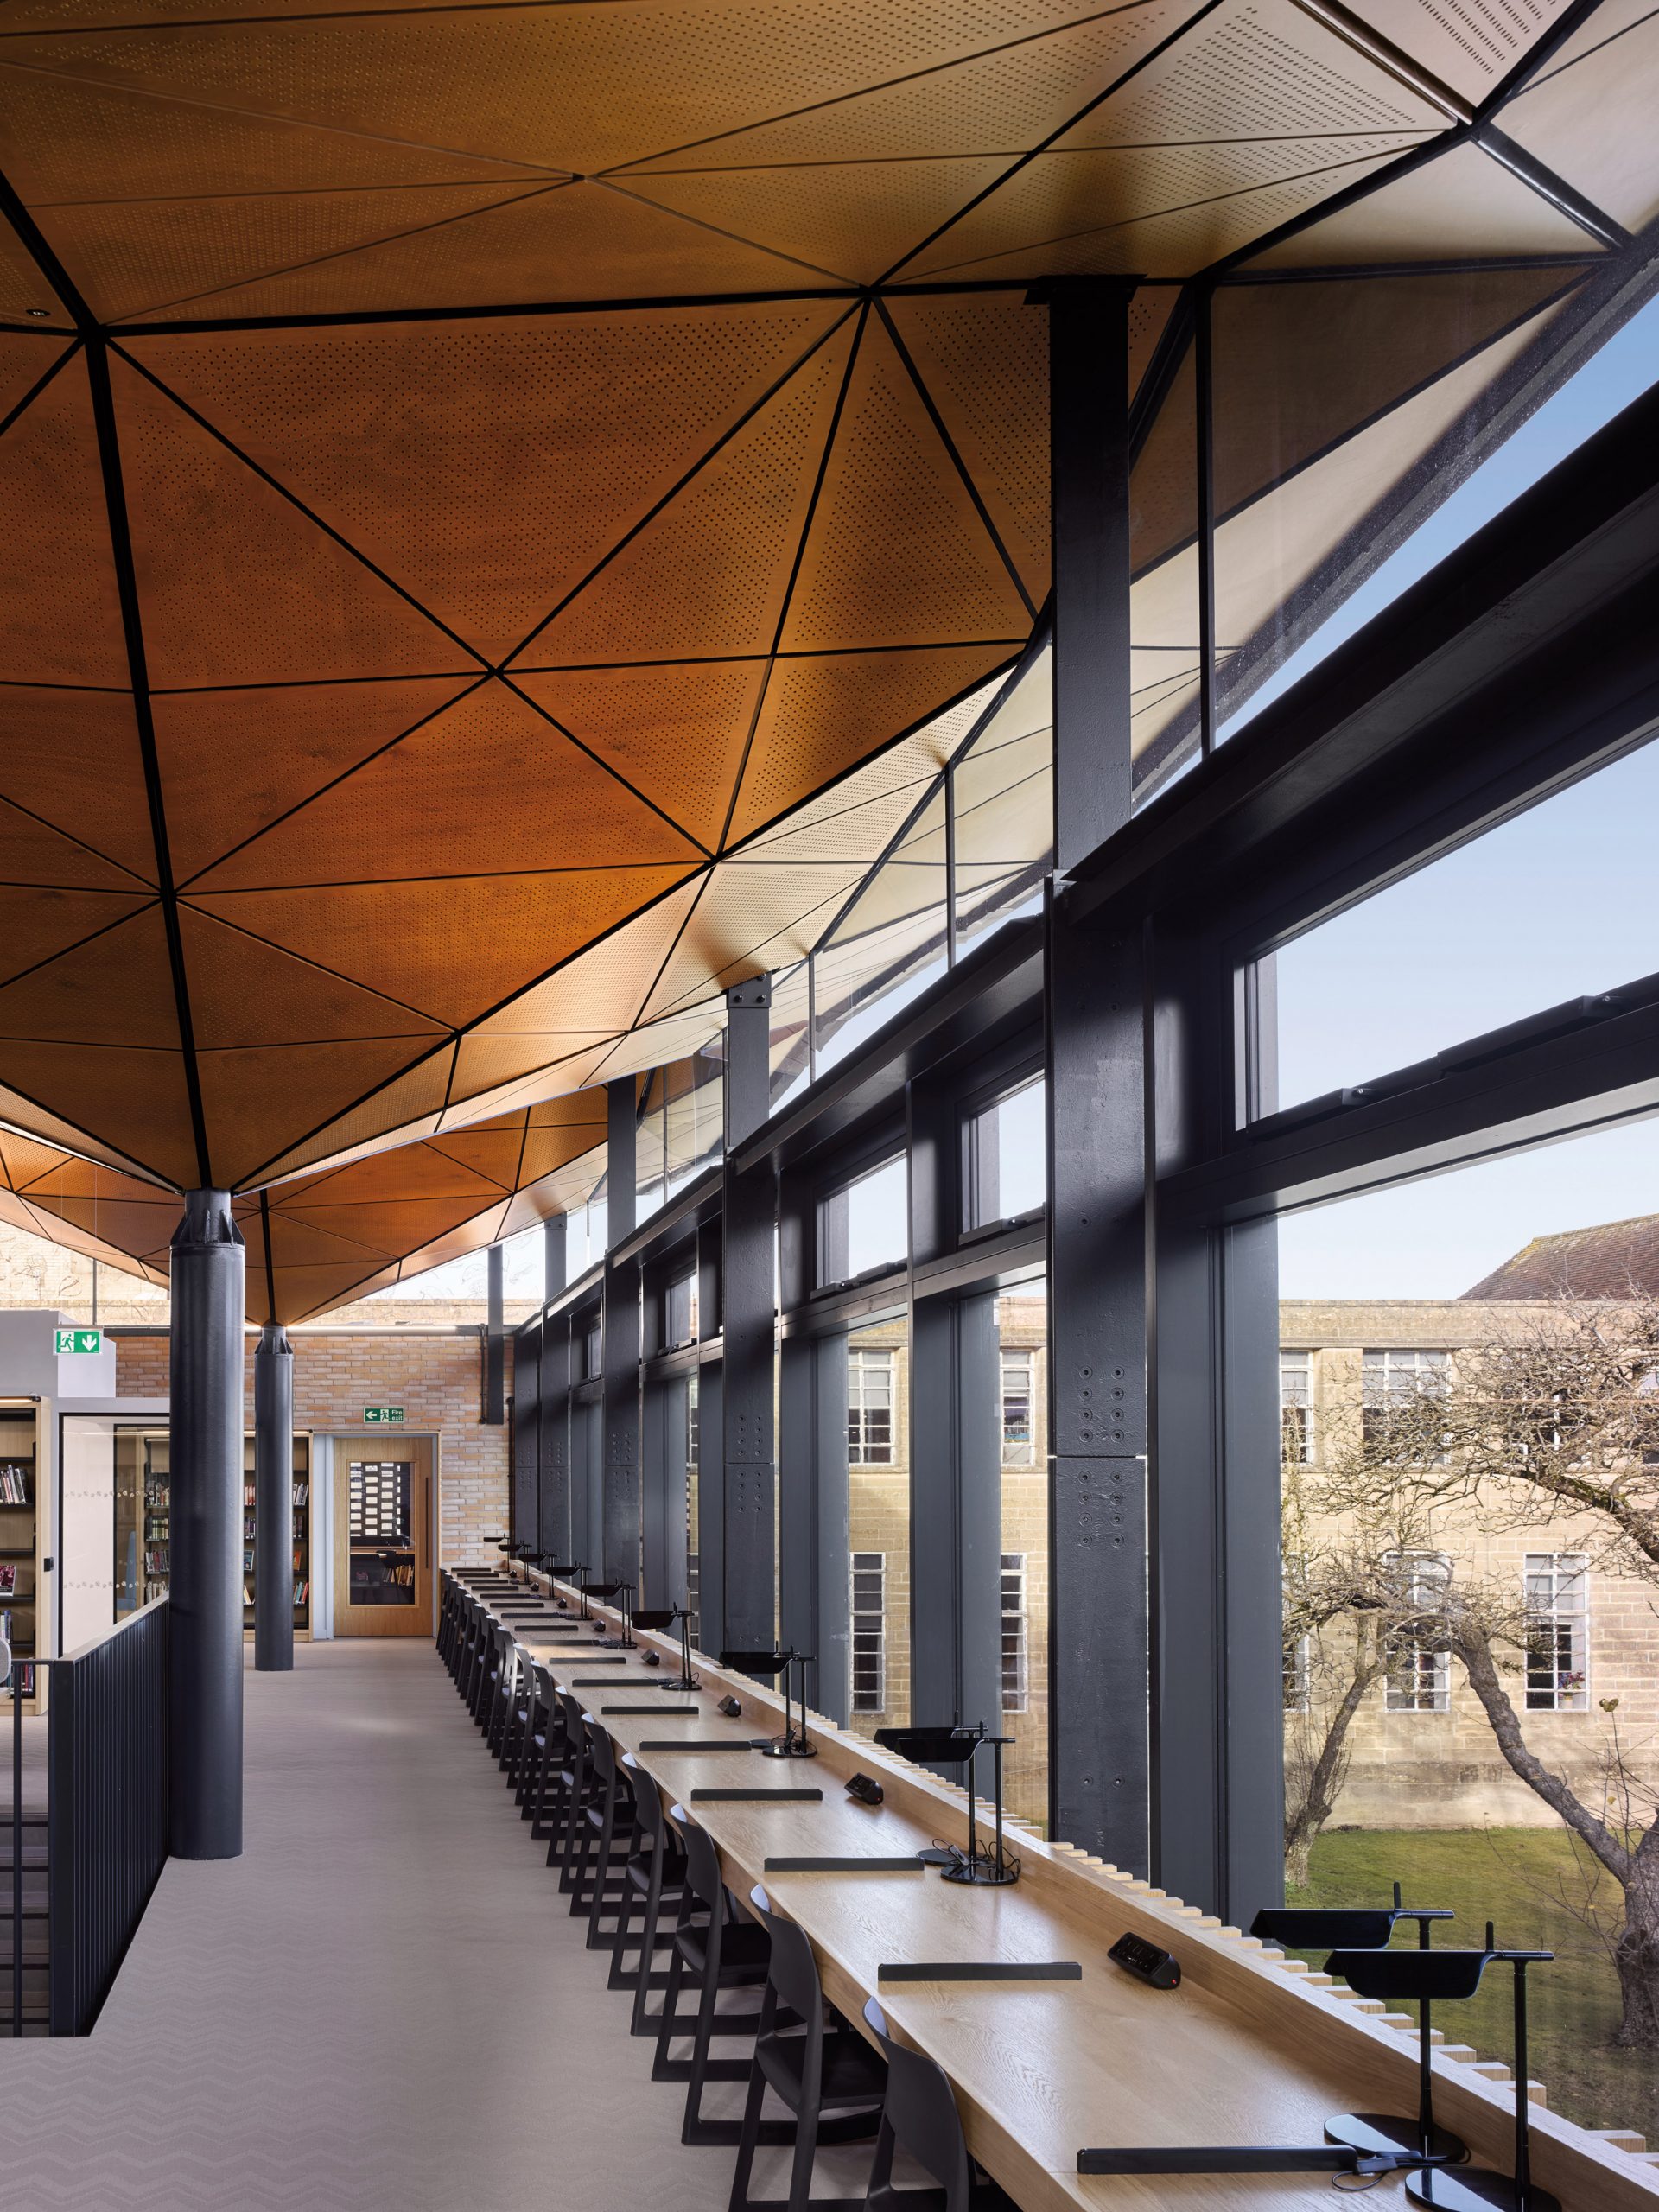 Geometric timber roof lines the interior of the design